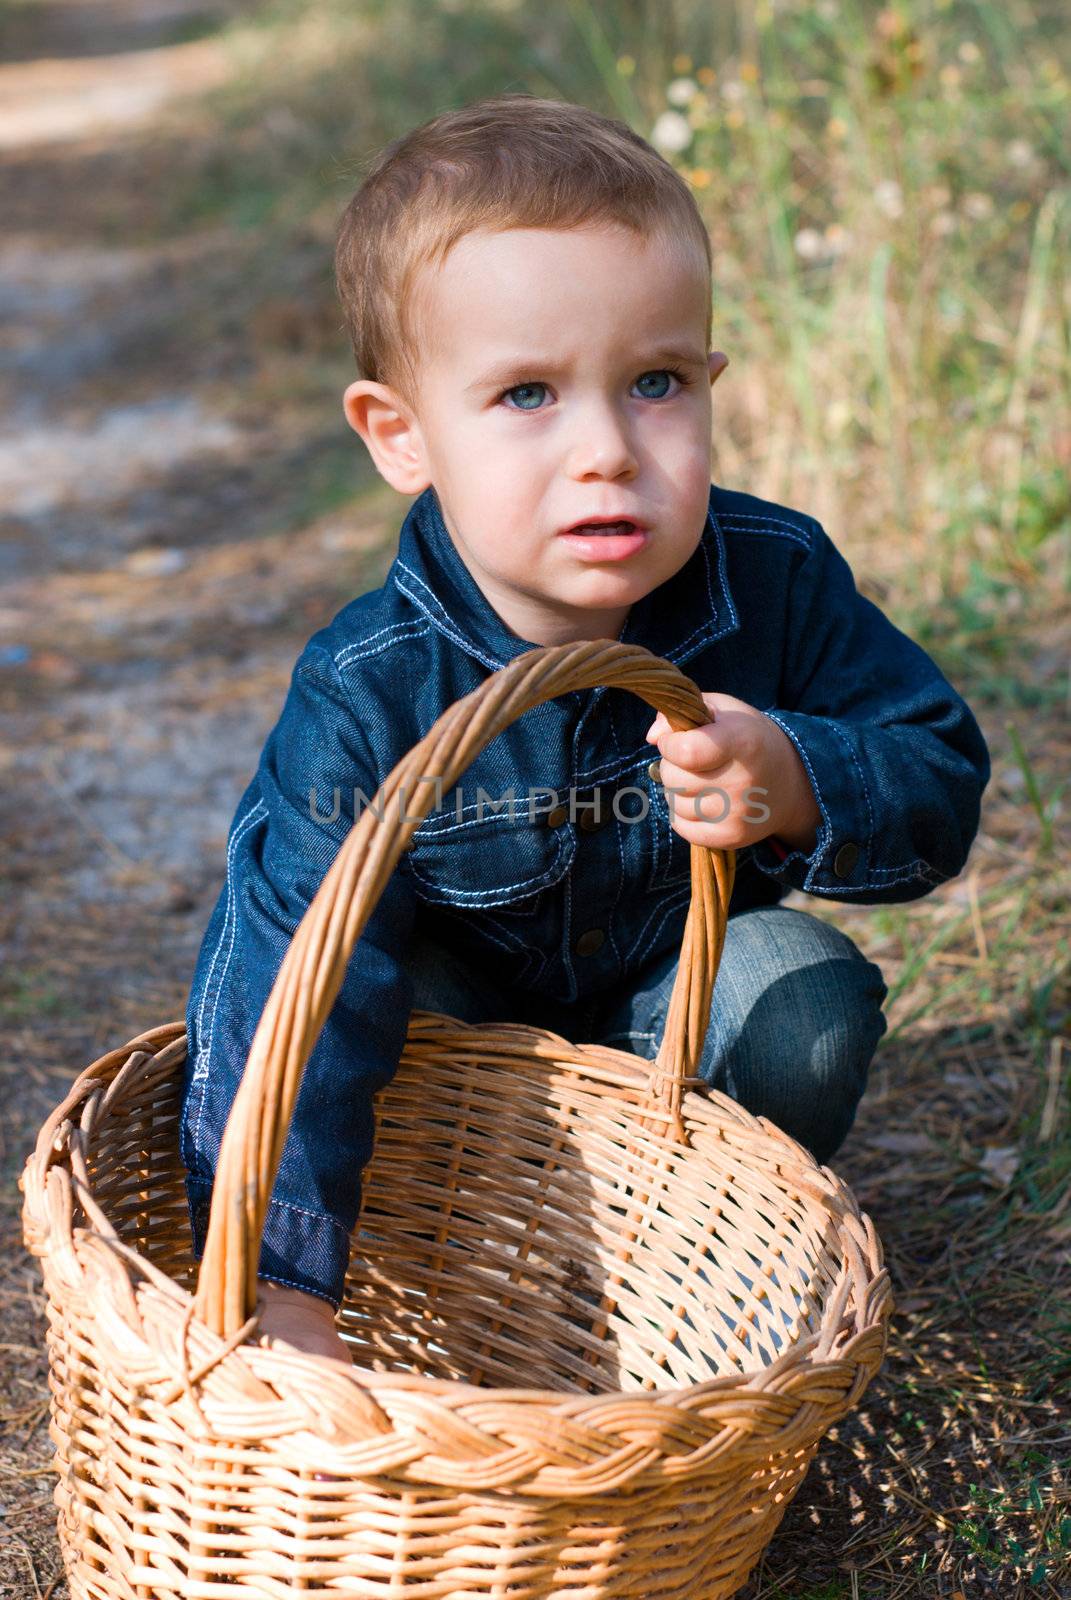 Cute boy with basket in a forest